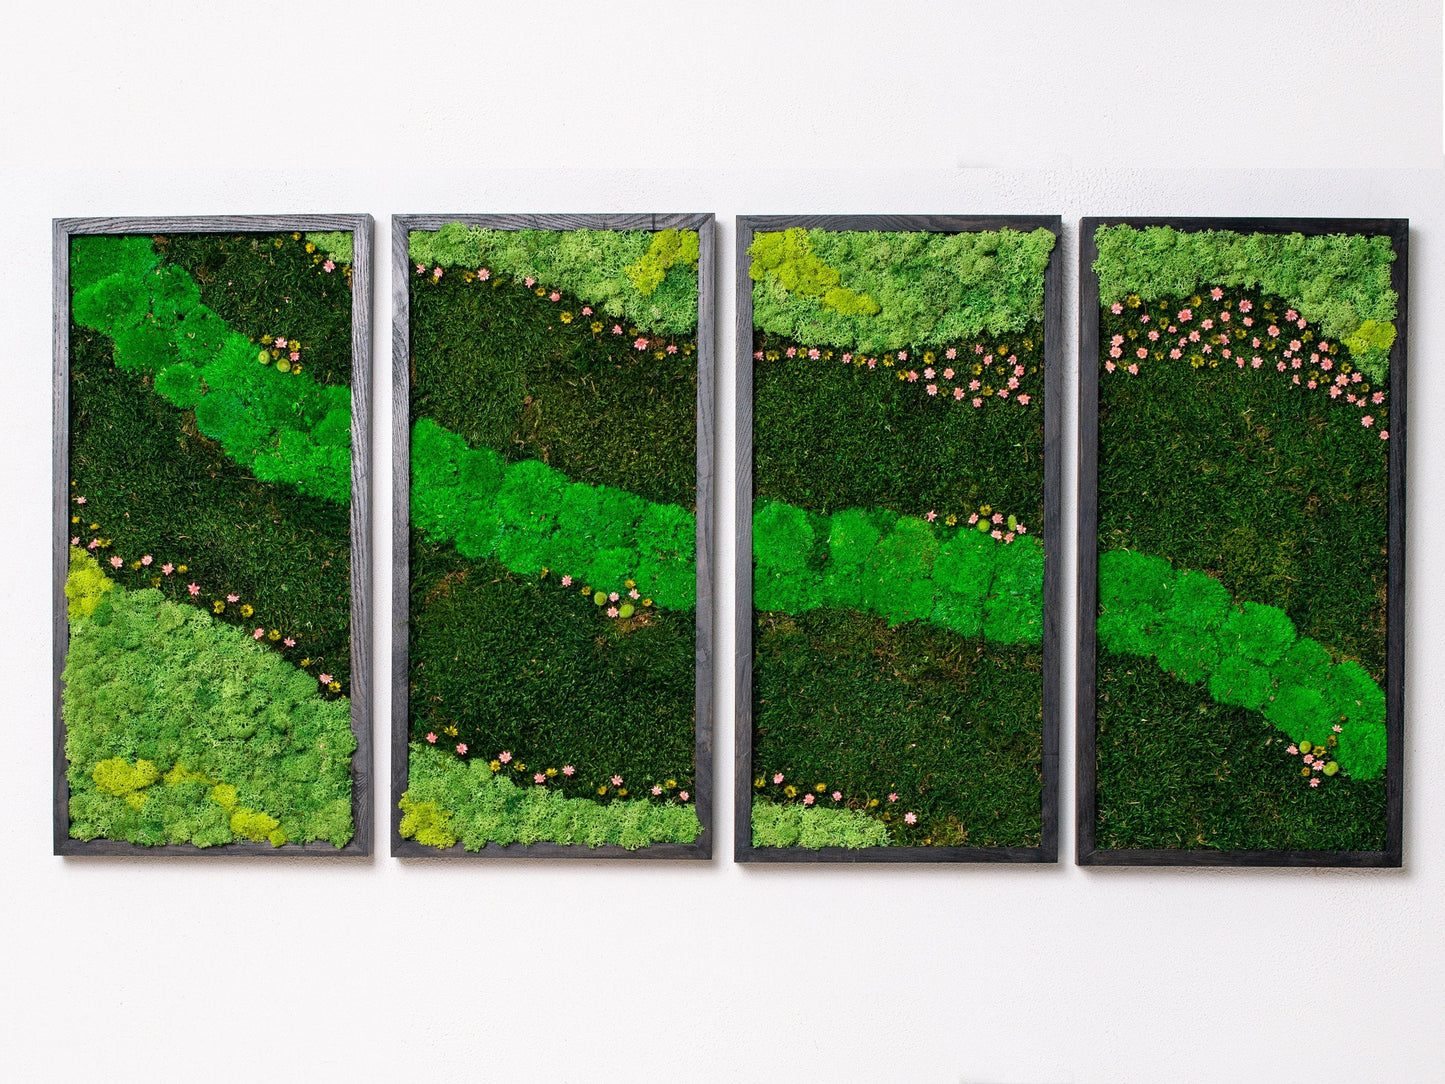 Experience Nature Indoors with Our Preserved Moss Wall Art Set - The Green Oasis!